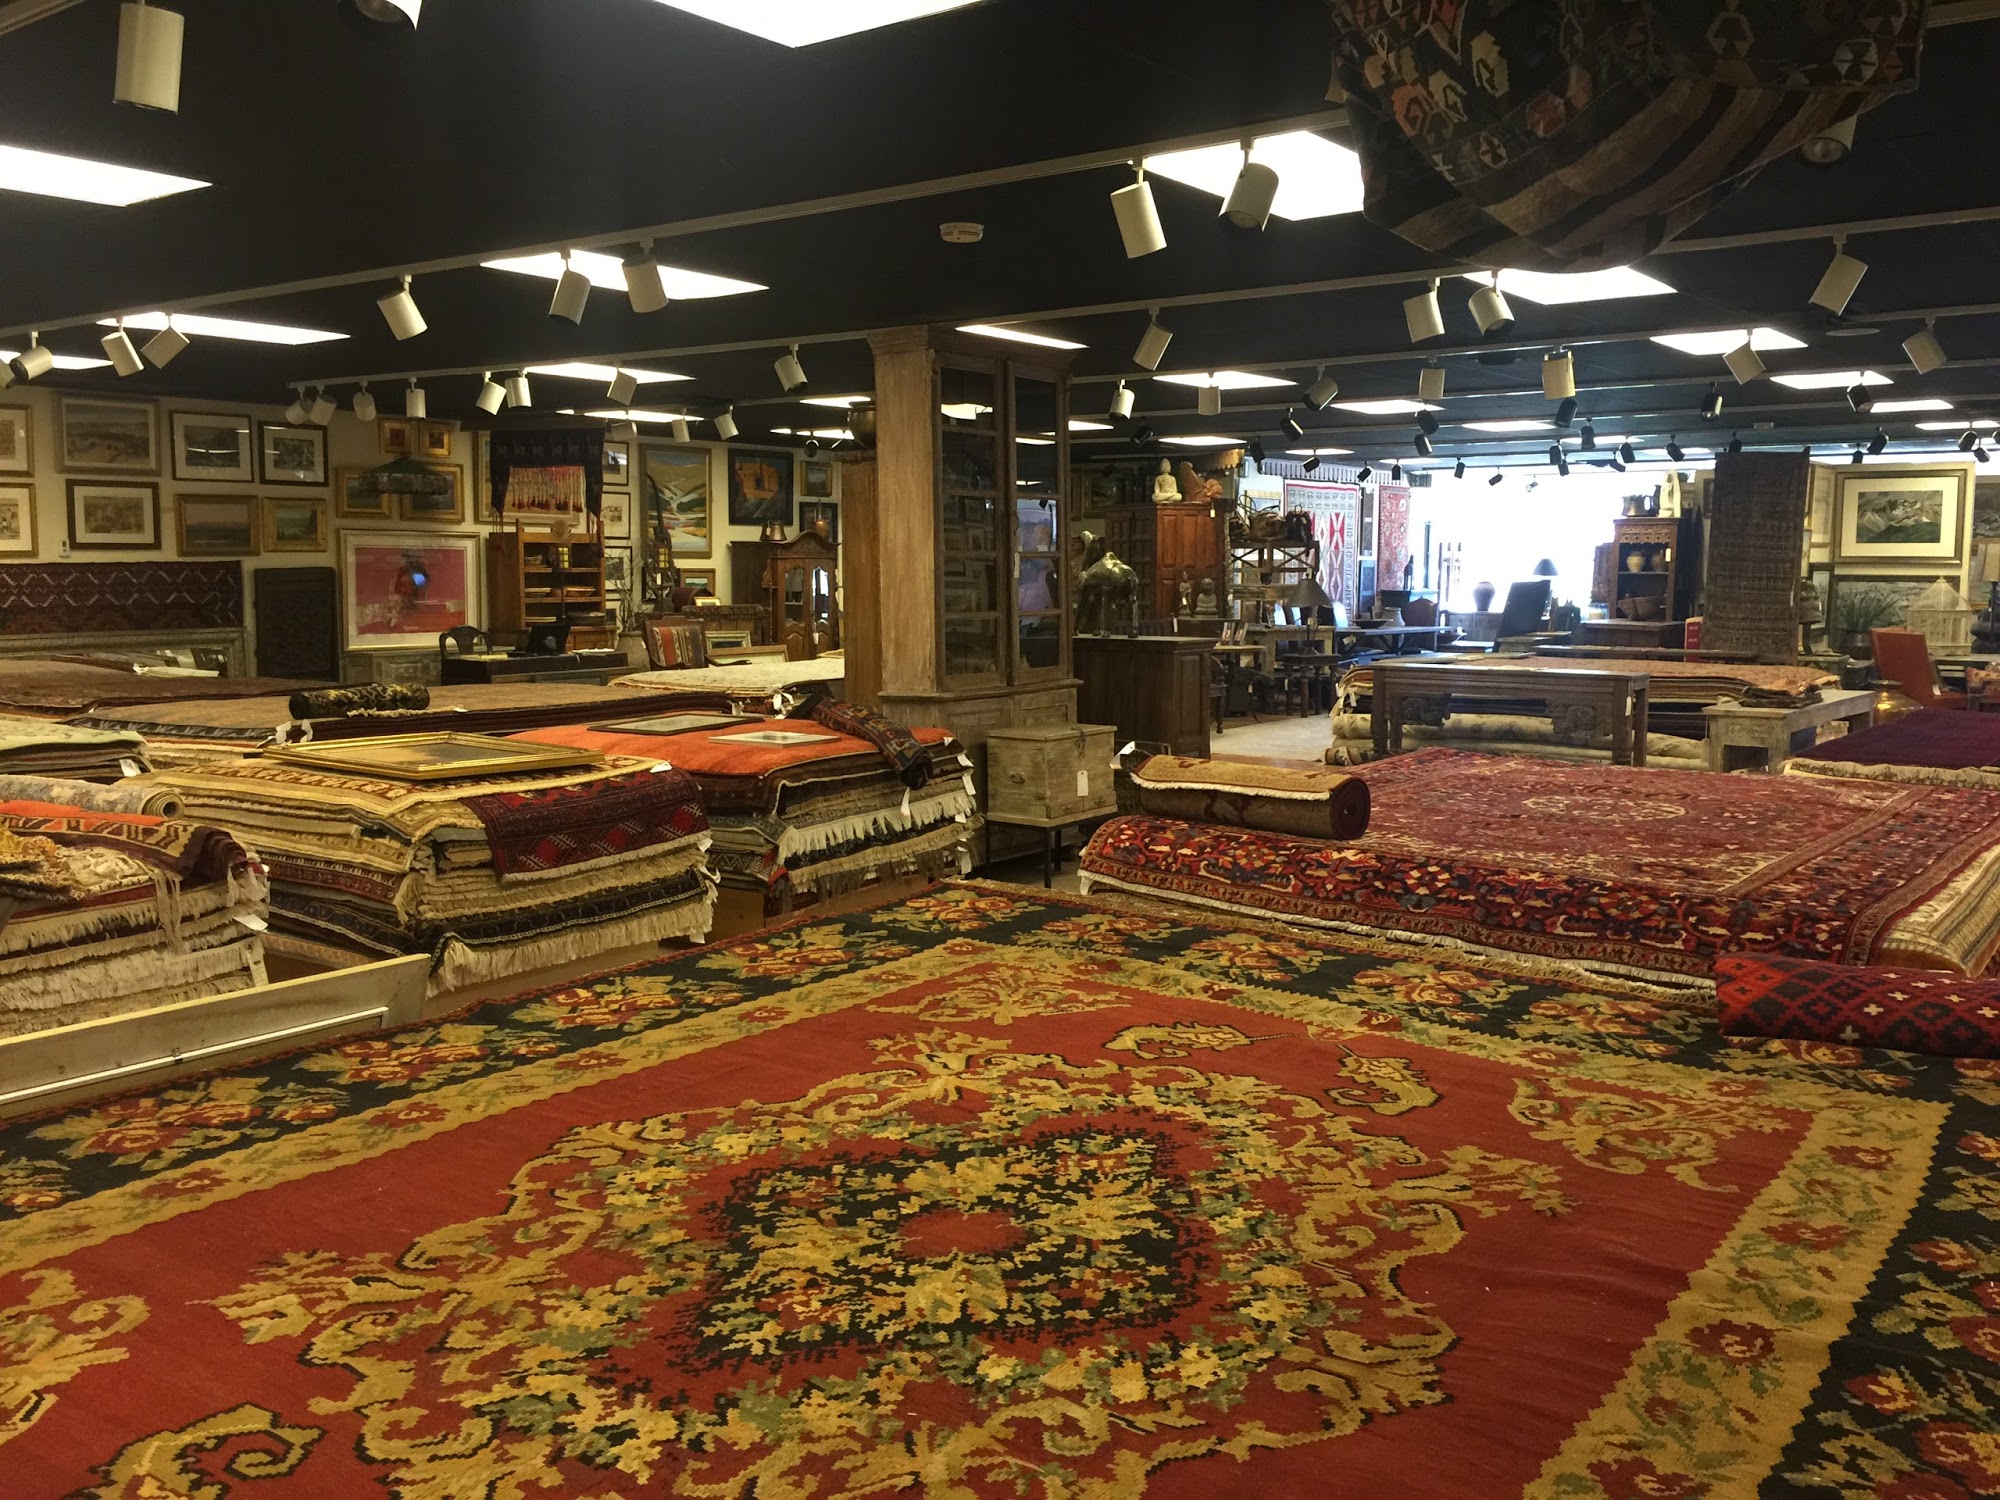 The Art Bank and Oriental Rug Center